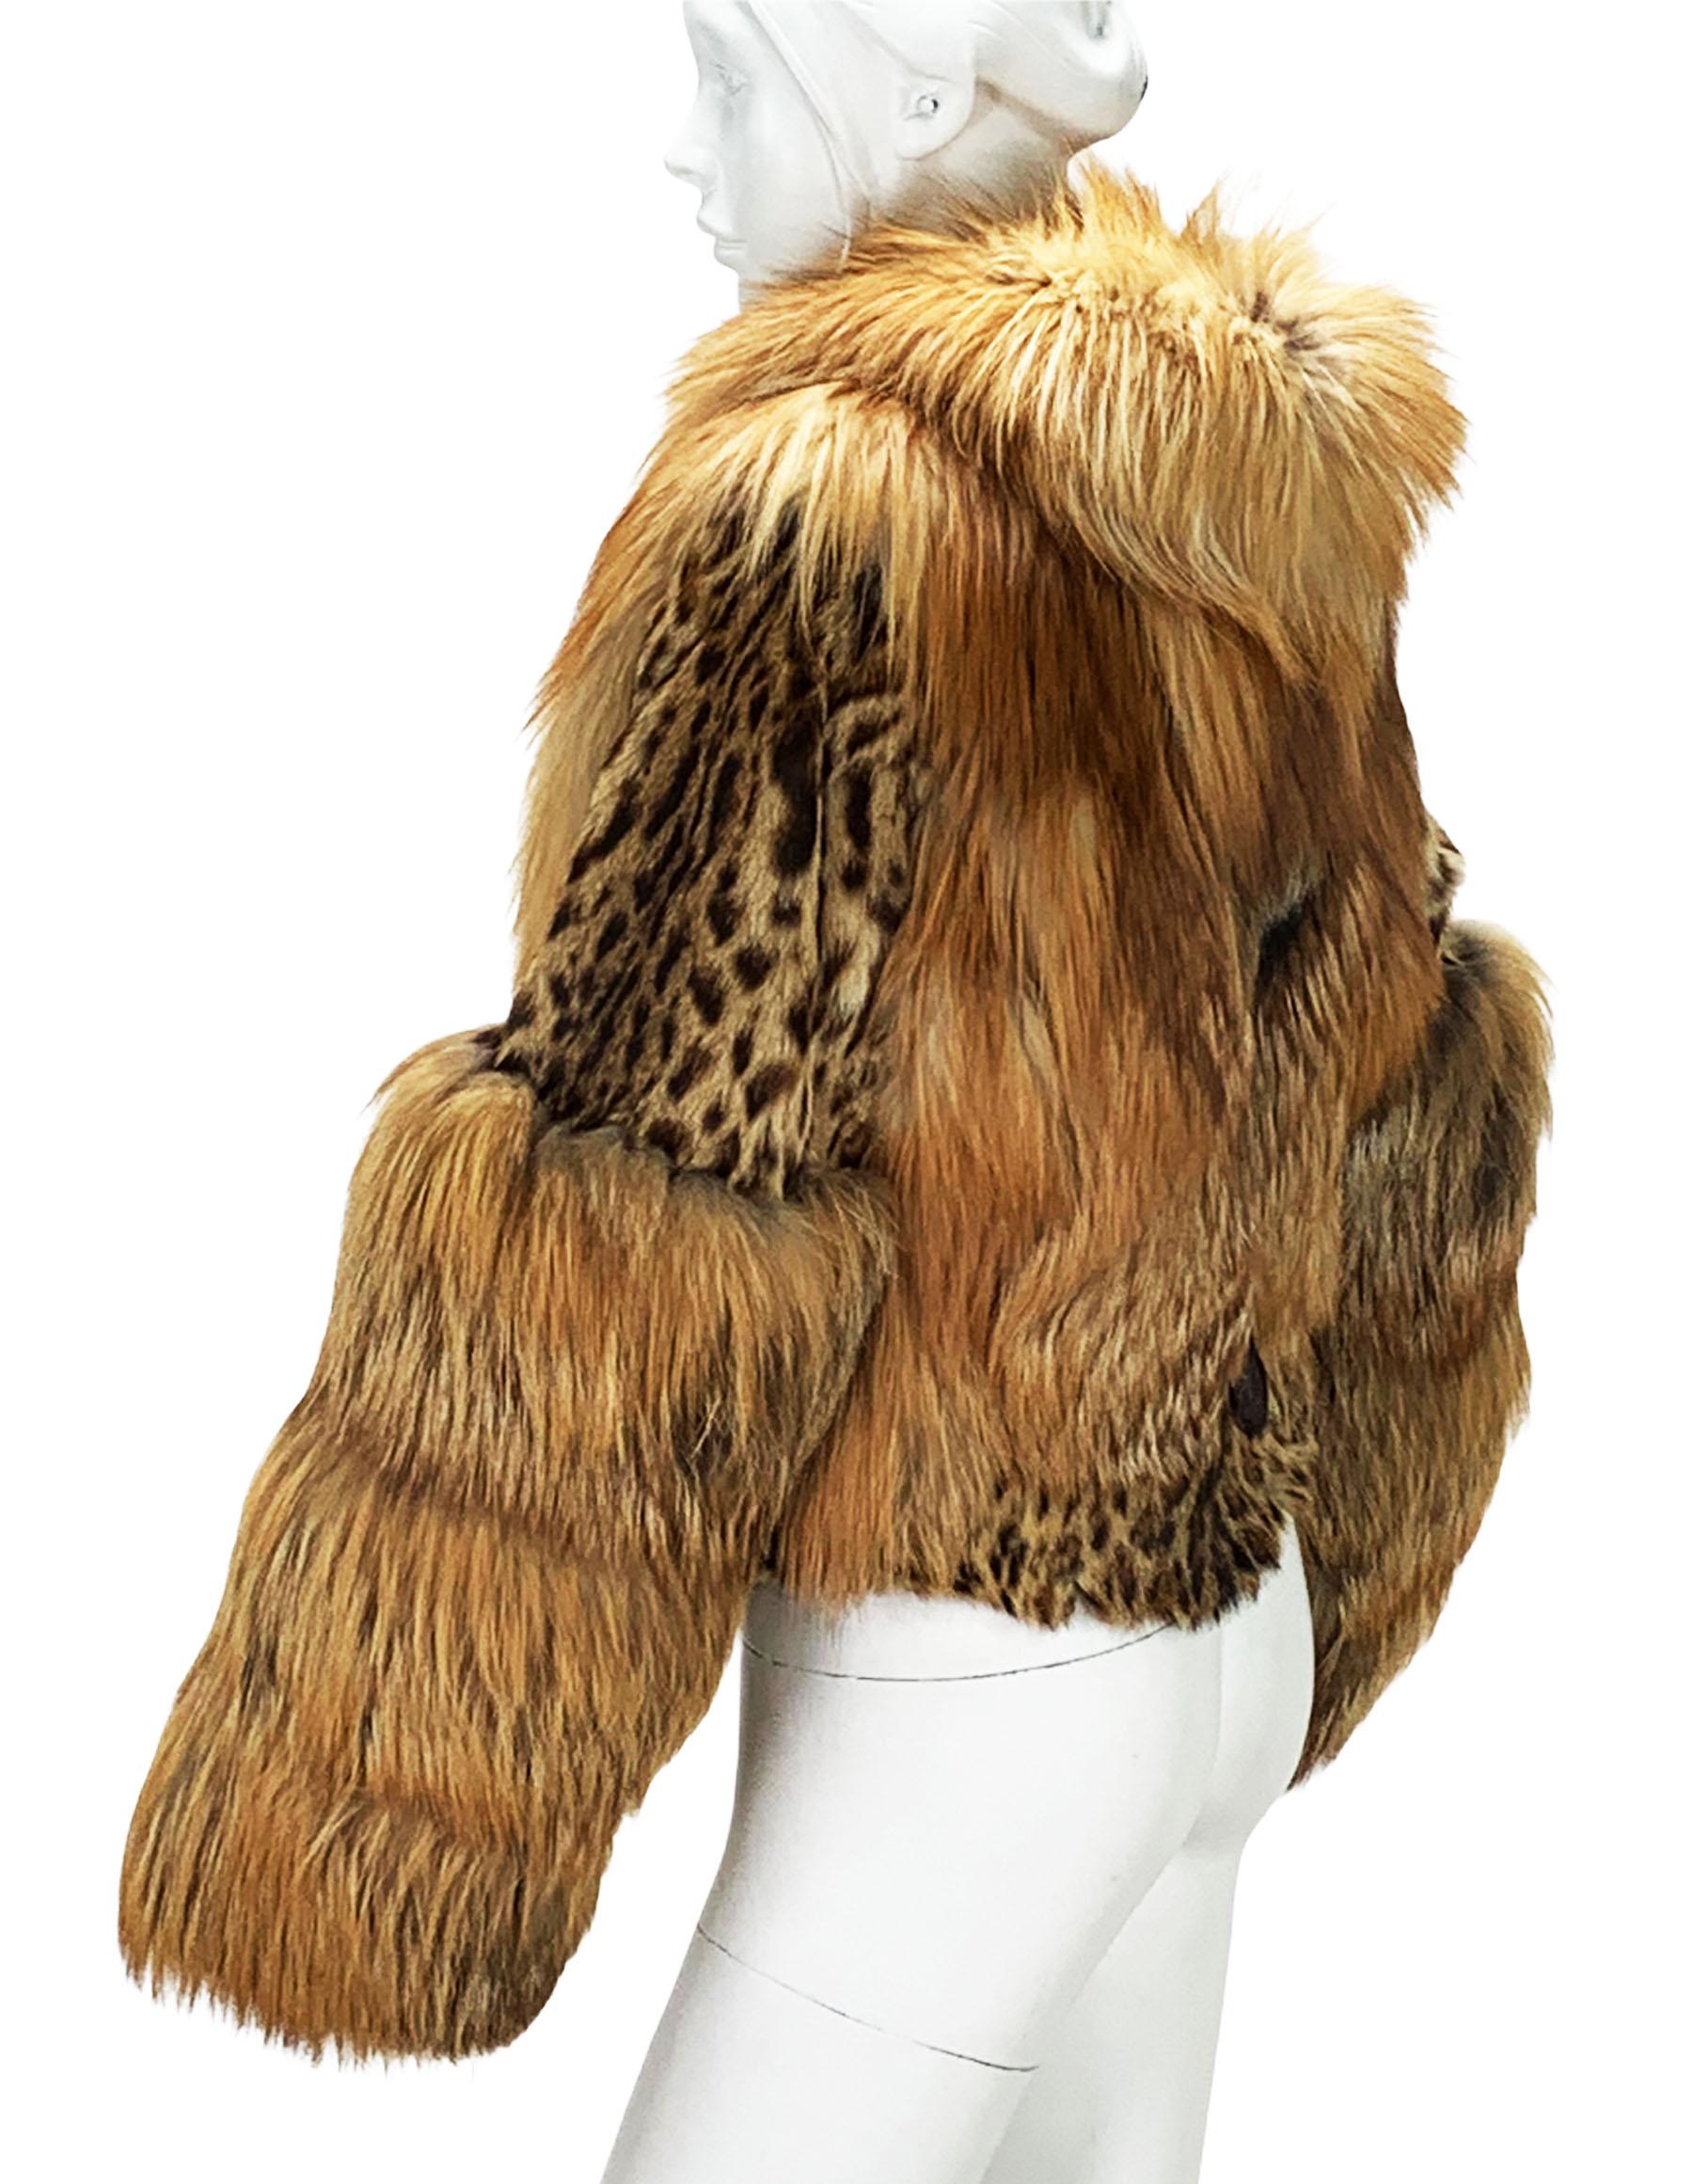 Museum Tom Ford for Gucci Runway F/W 1999 2 in 1 Fur Coat Jacket  For Sale 10